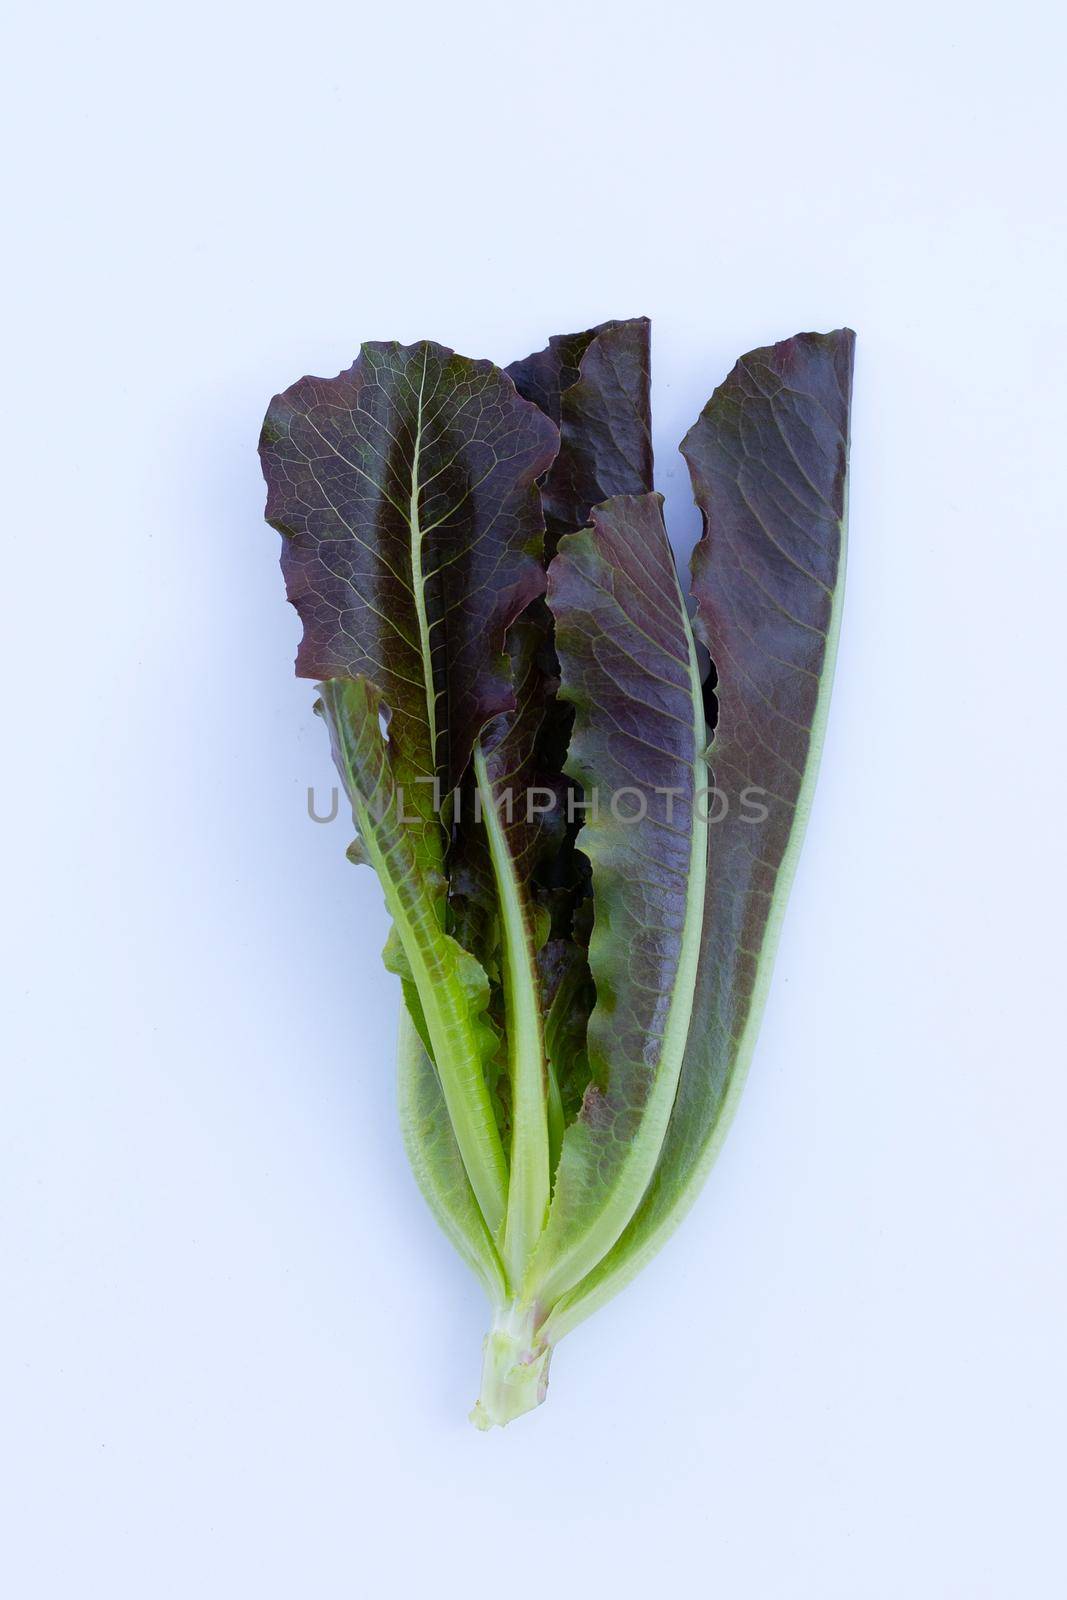 Red Cos Lettuce leaves on white background. by Bowonpat